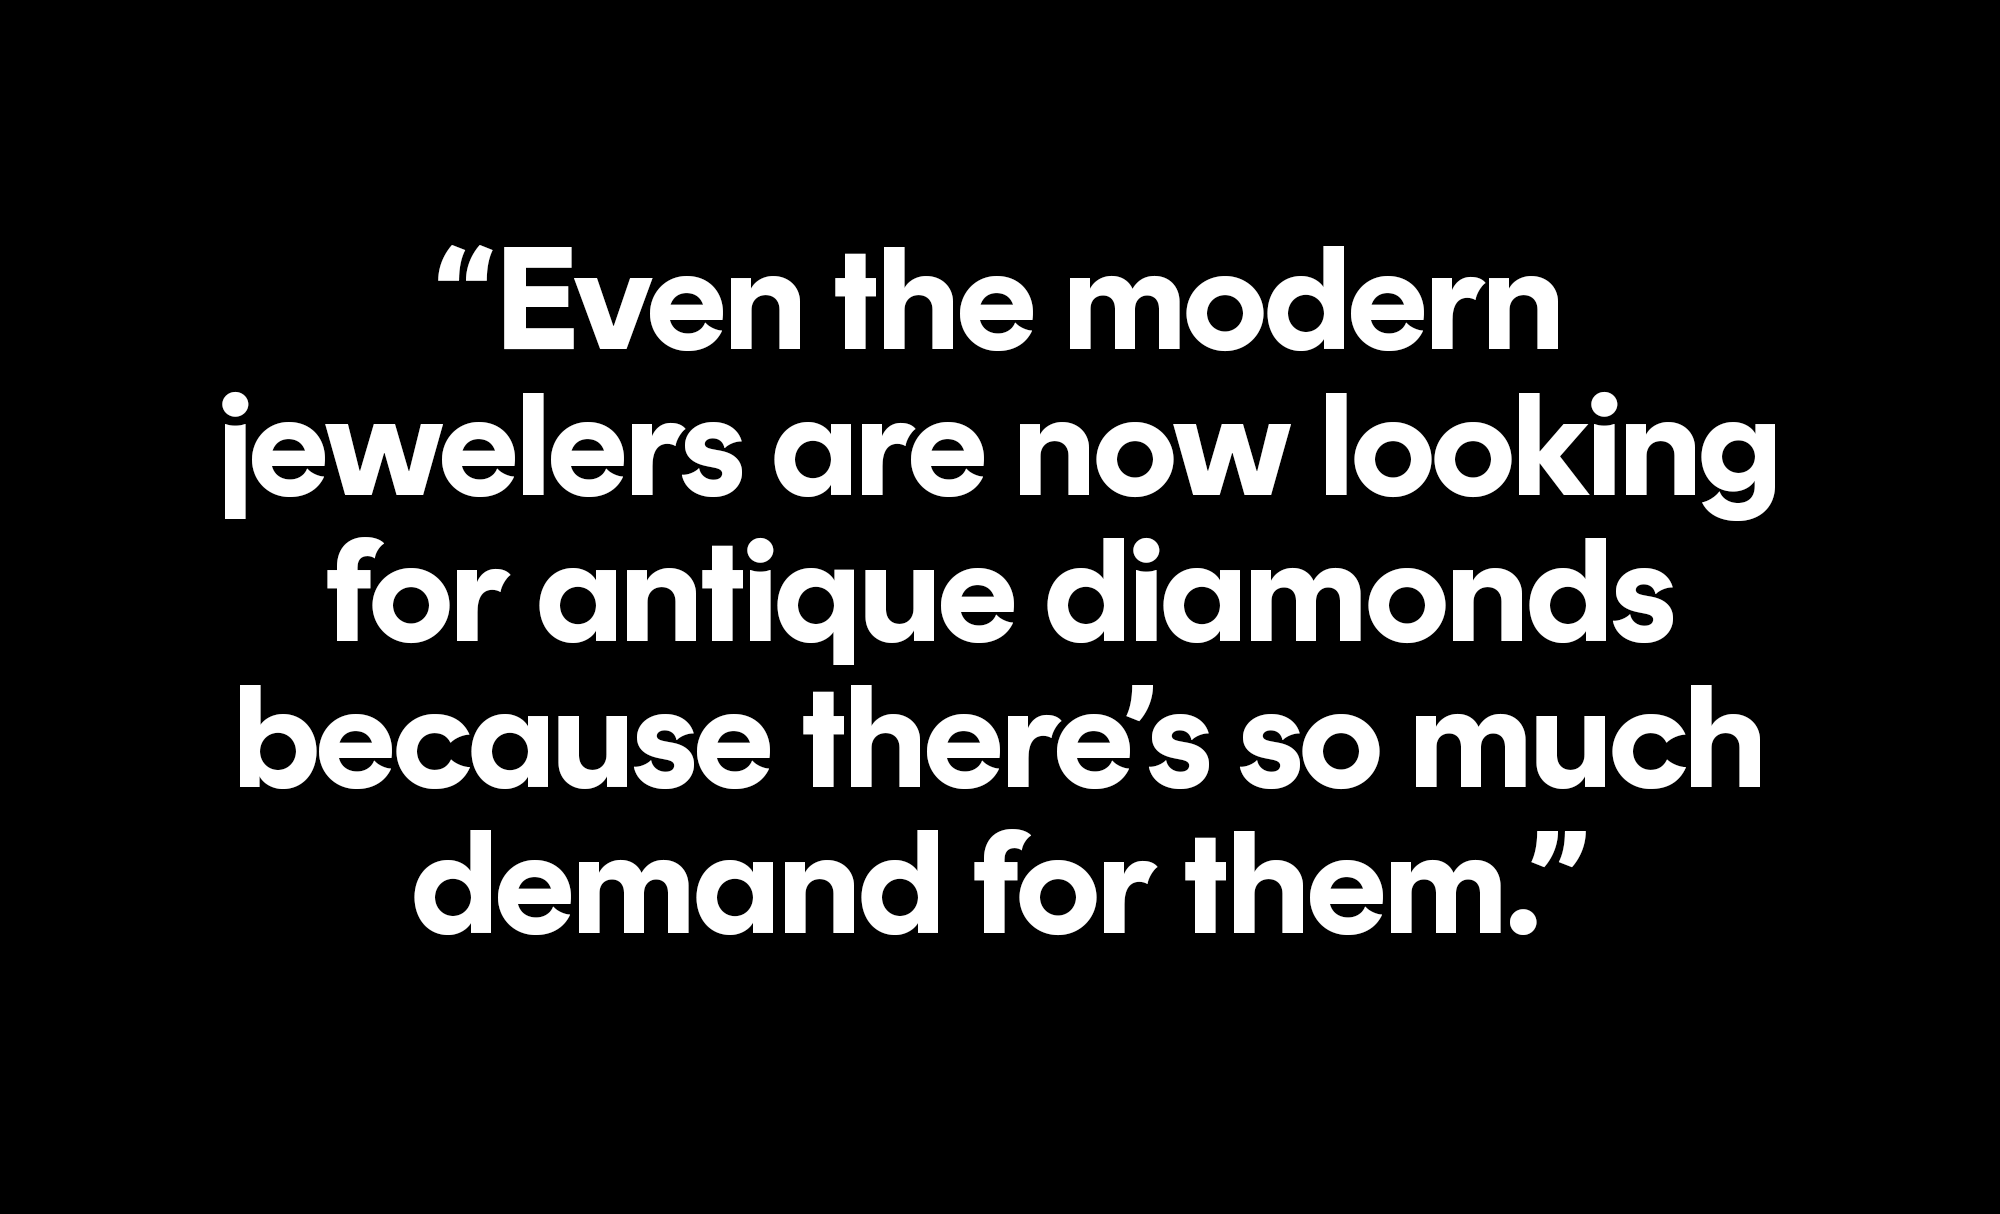 even the modern jewelers are now looking for antique diamonds, because there's so much demand for them